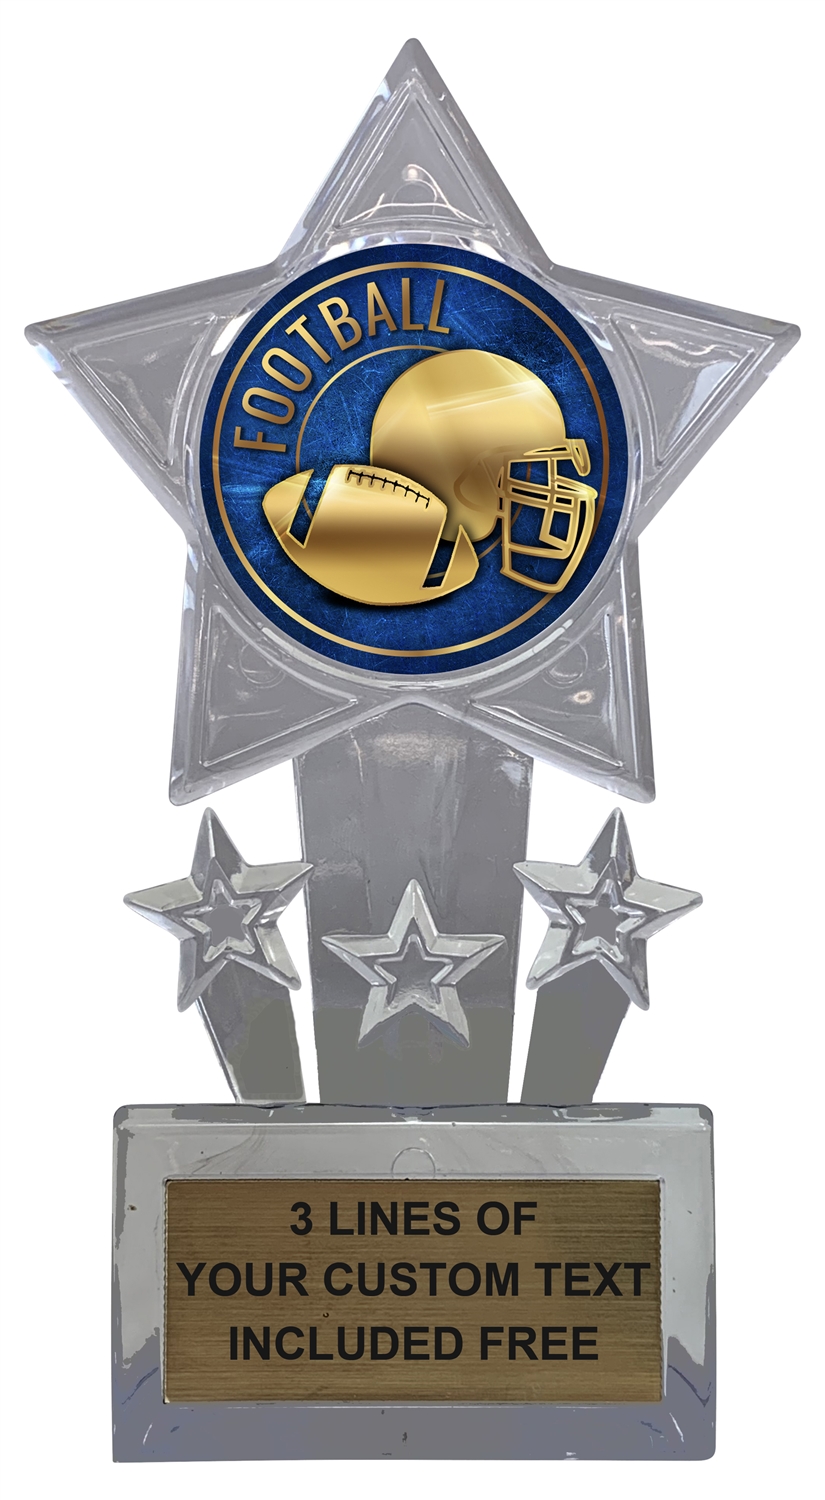 RUGBY MINI STAR TROPHY AWARD RUGBY UNION RUGBY LEAGUE 8cm FREE ENGRAVING A959 S3 